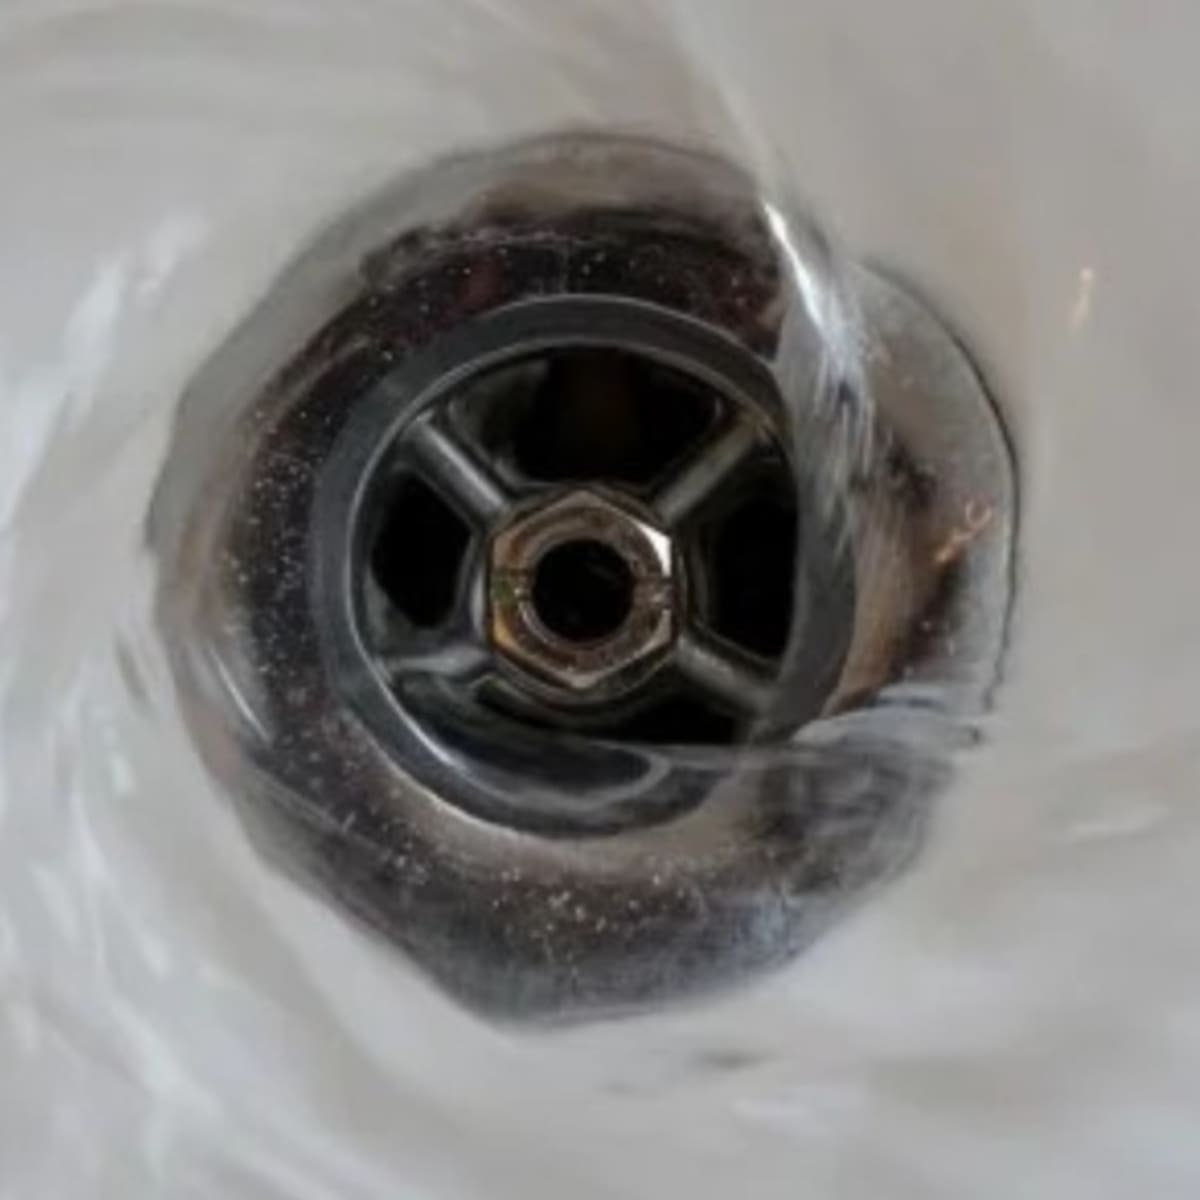 How to Unclog a Double Kitchen Sink Drain - Dengarden